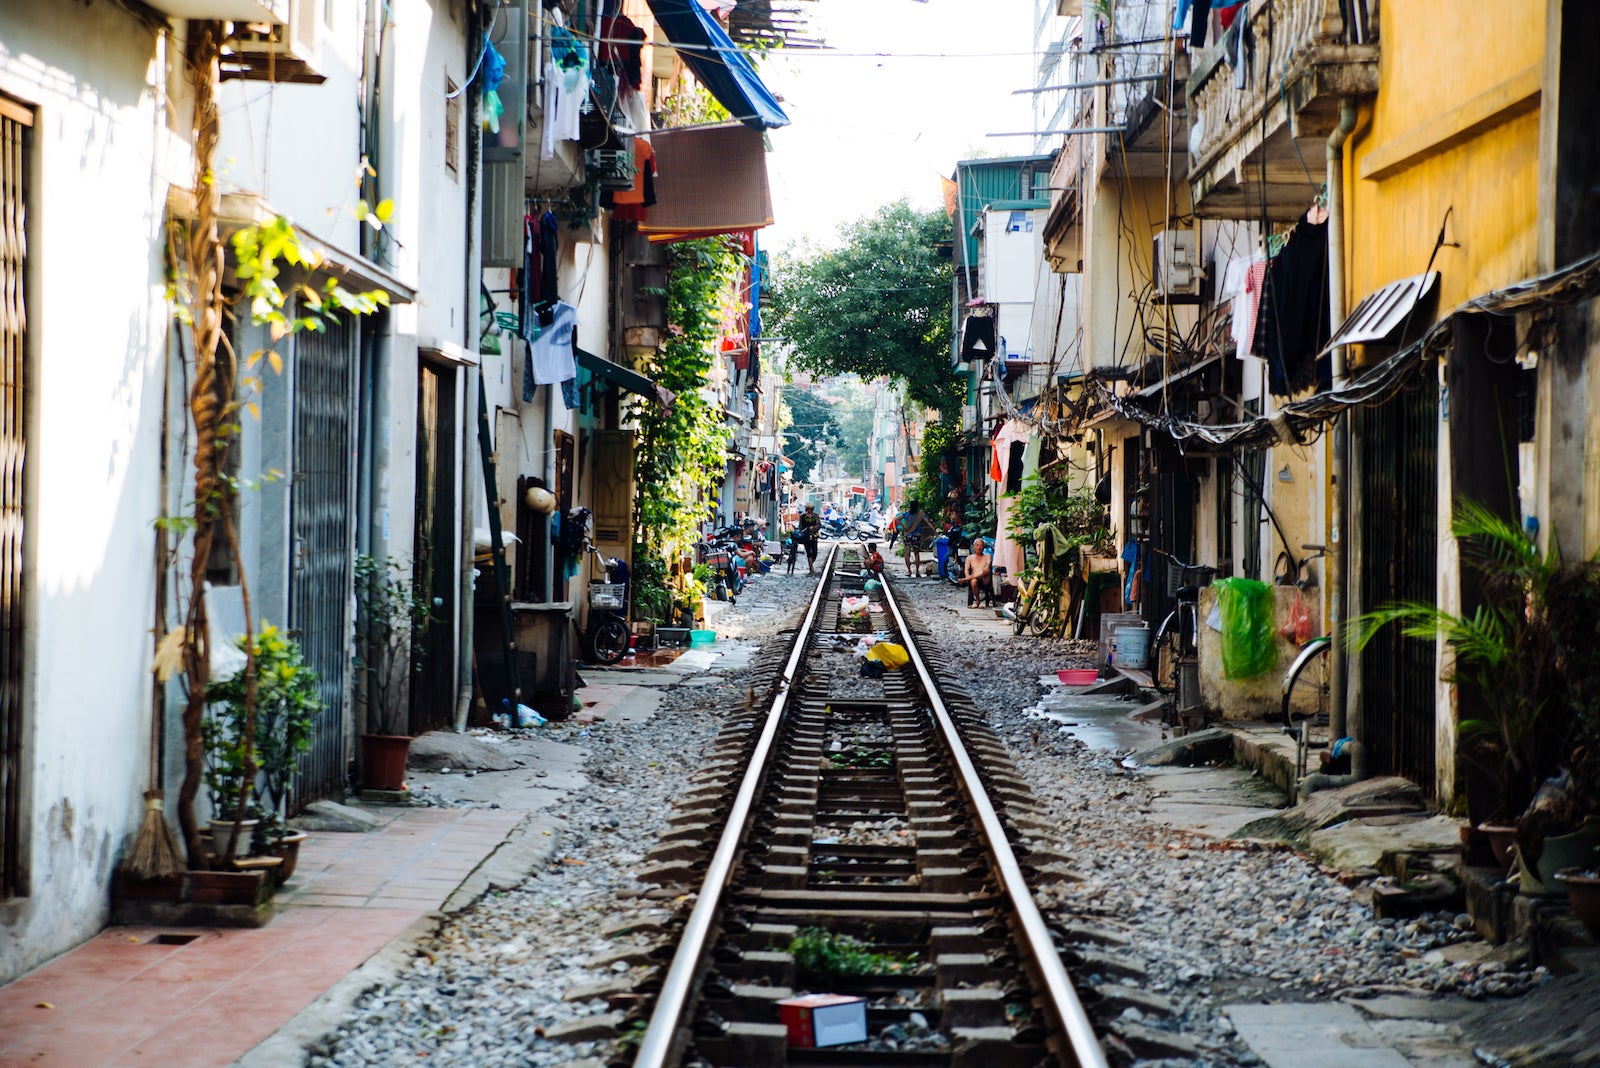 Life of people who live near the railway in Hanoi ancient town.